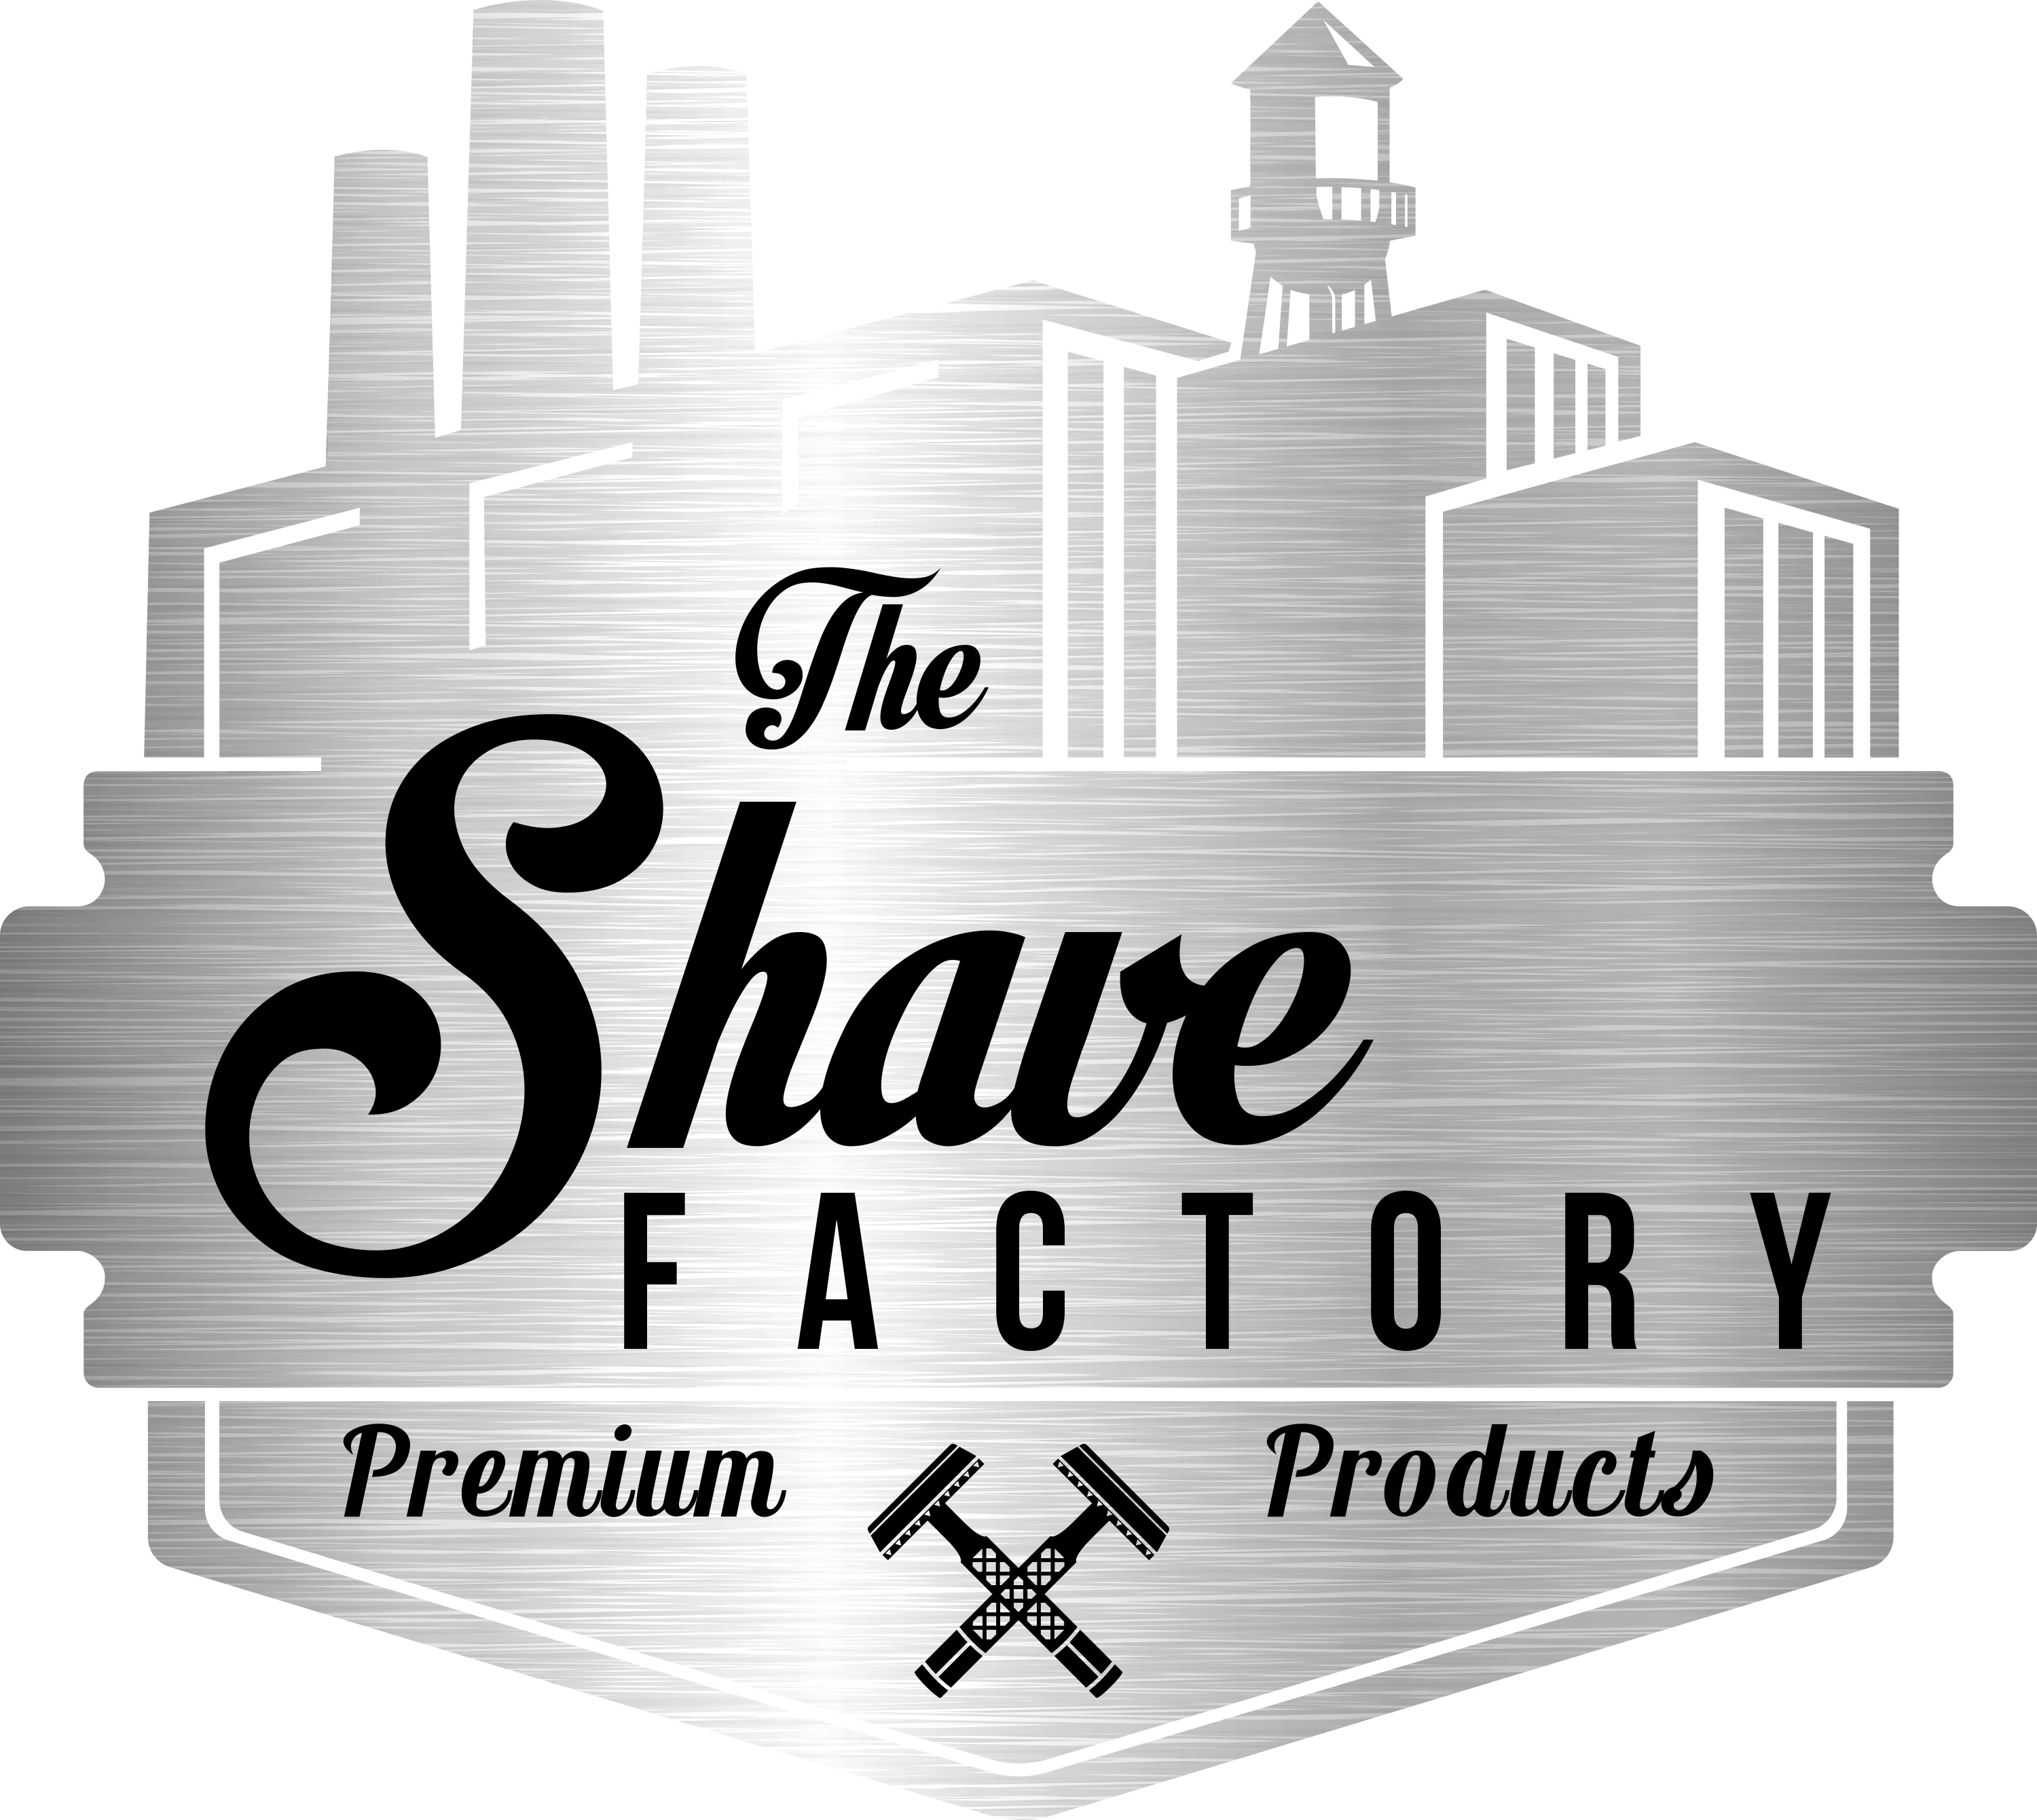 THE SHAVE FACTOR